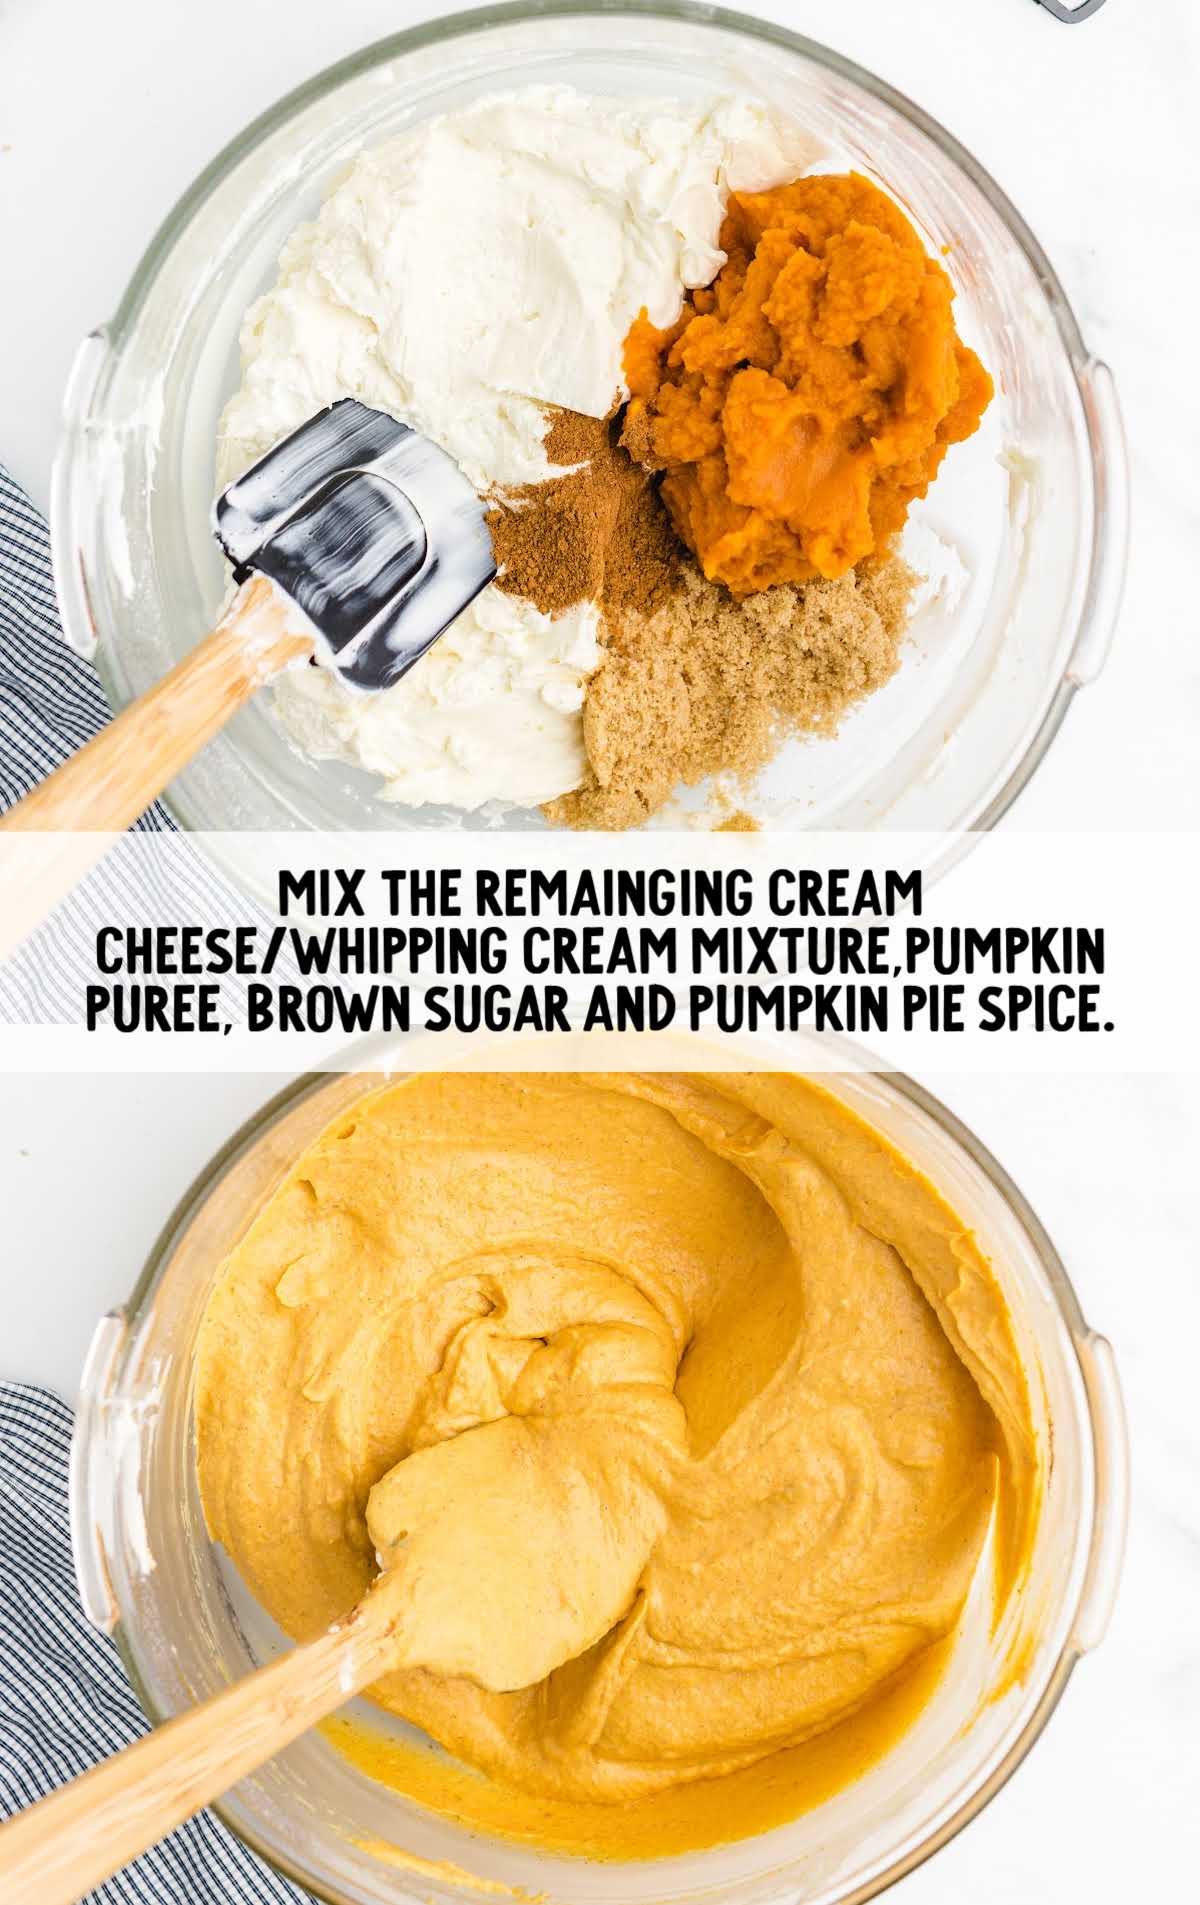 cream cheese/whipped cream mixture, pumpkin puree, sugar, and pumpkin pie spice being folded together in a bowl